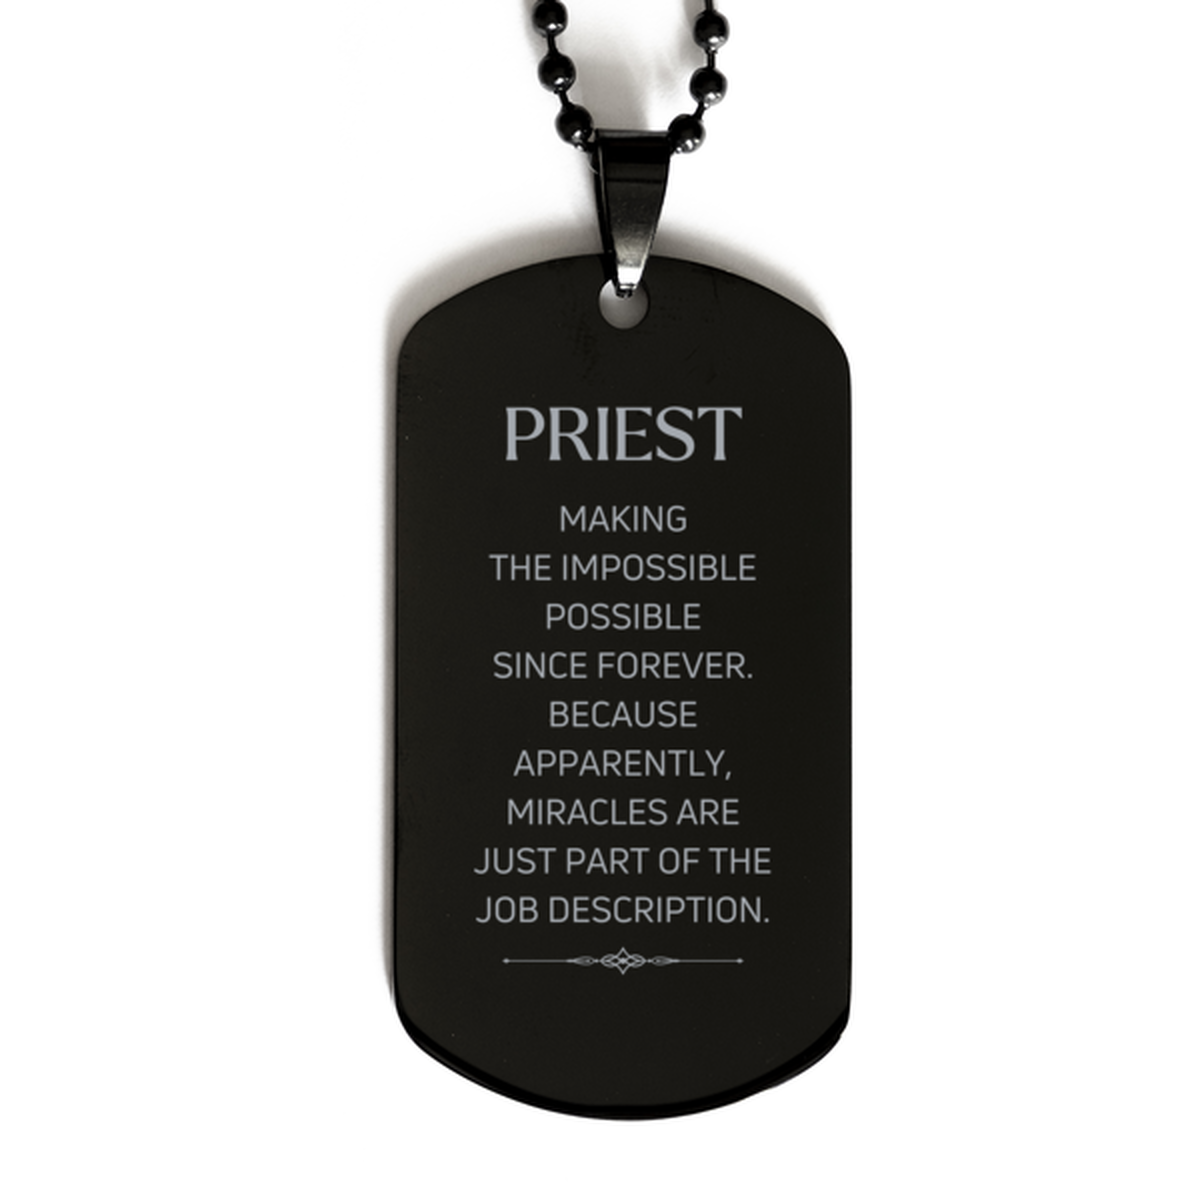 Funny Priest Gifts, Miracles are just part of the job description, Inspirational Birthday Black Dog Tag For Priest, Men, Women, Coworkers, Friends, Boss